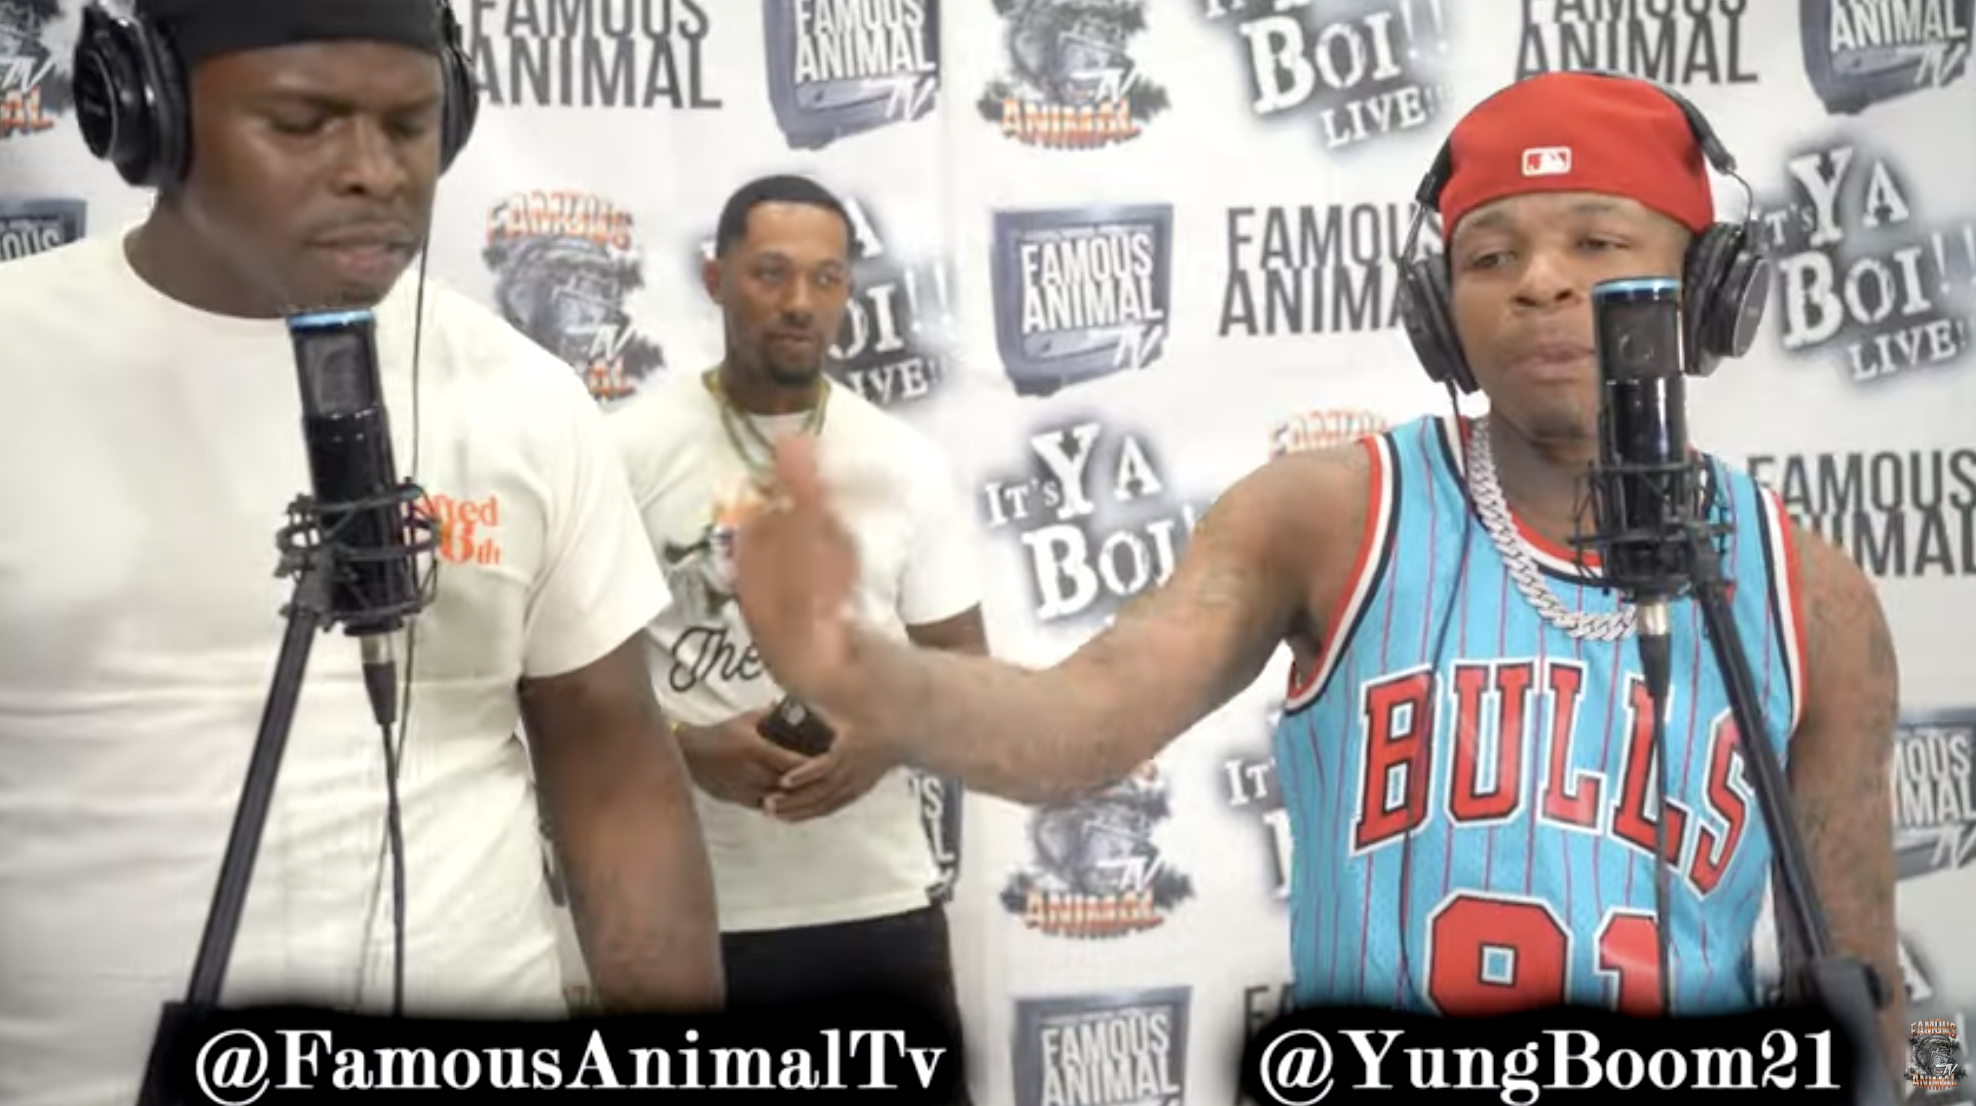 YungBoom drops by Famous Animal TV and drops some fire.